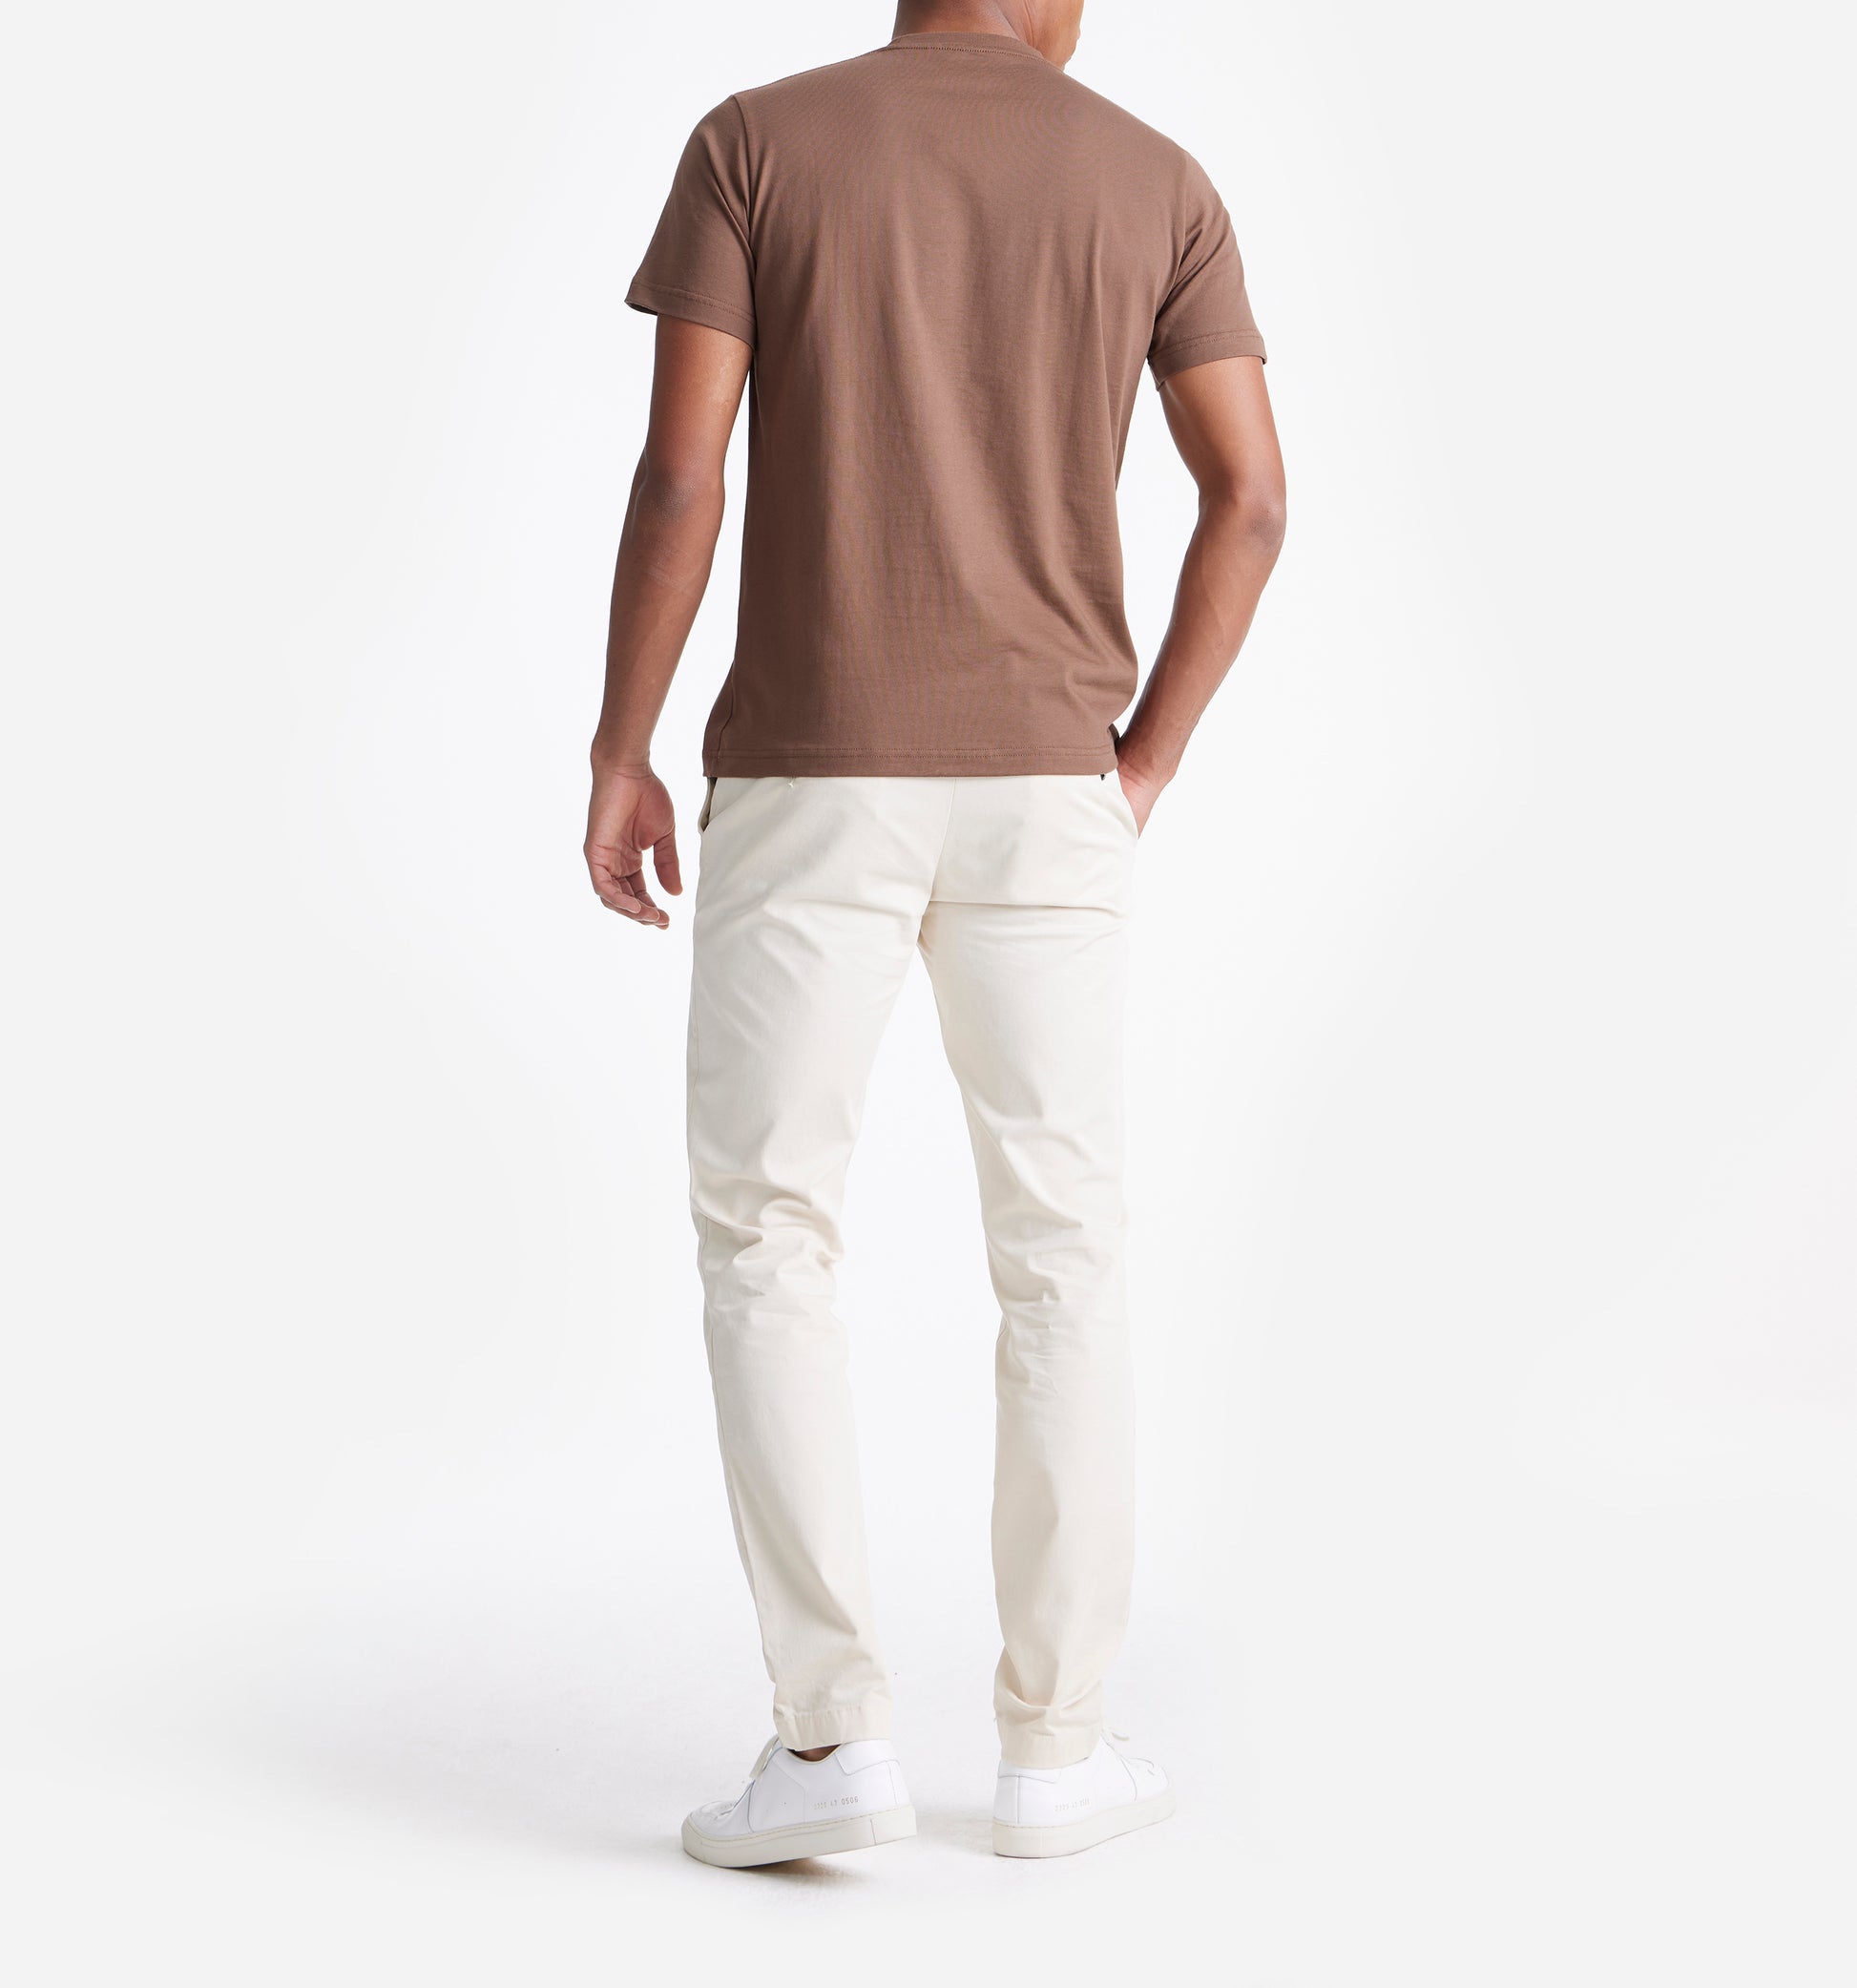 The Steve - Basic Cotton T-shirt In Brown From King Essentials